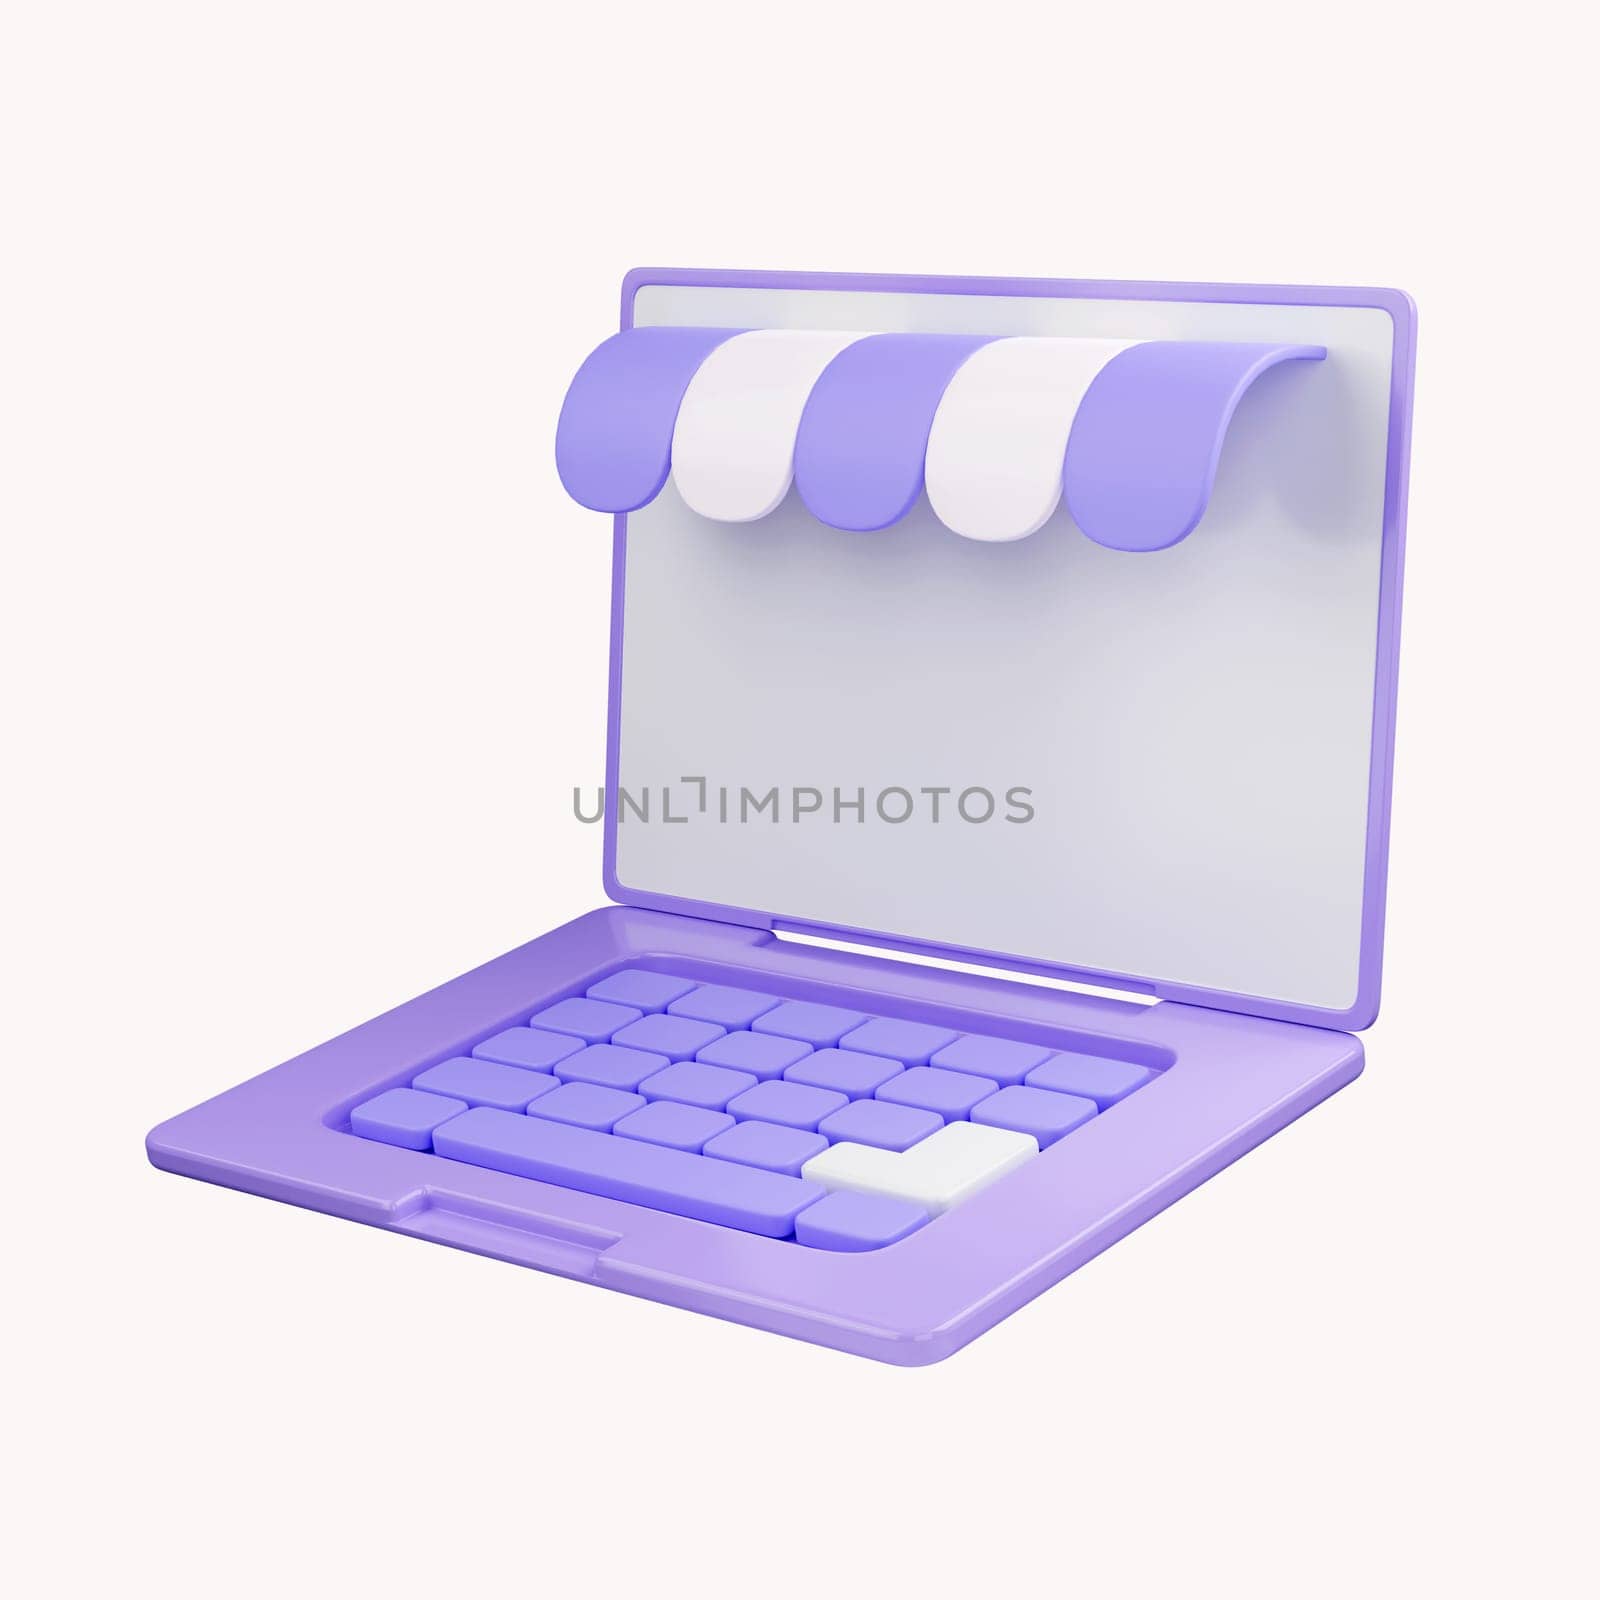 3D shopping online with laptop for online shopping store. payment concept. Notebook icon 3d render illustration by meepiangraphic